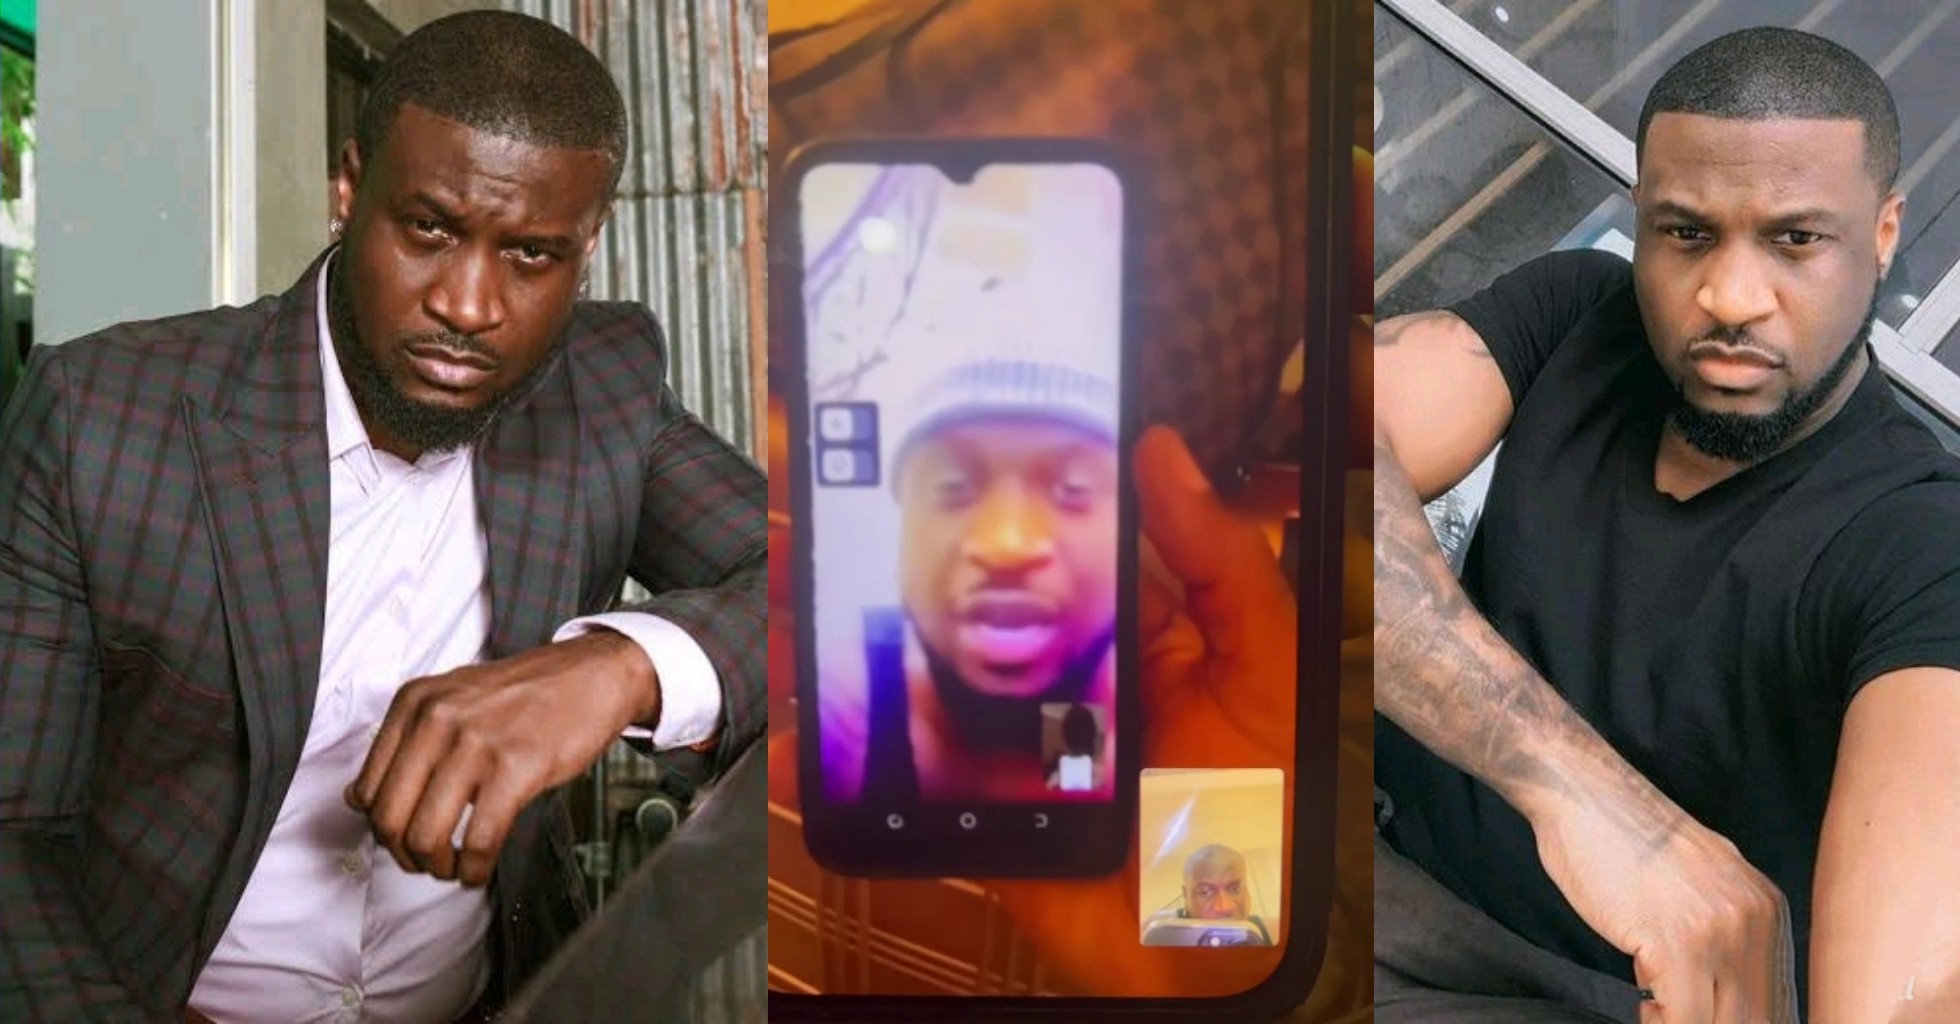 Peter Okoye shares moment he caught a fraudster using his face on video call to scam people